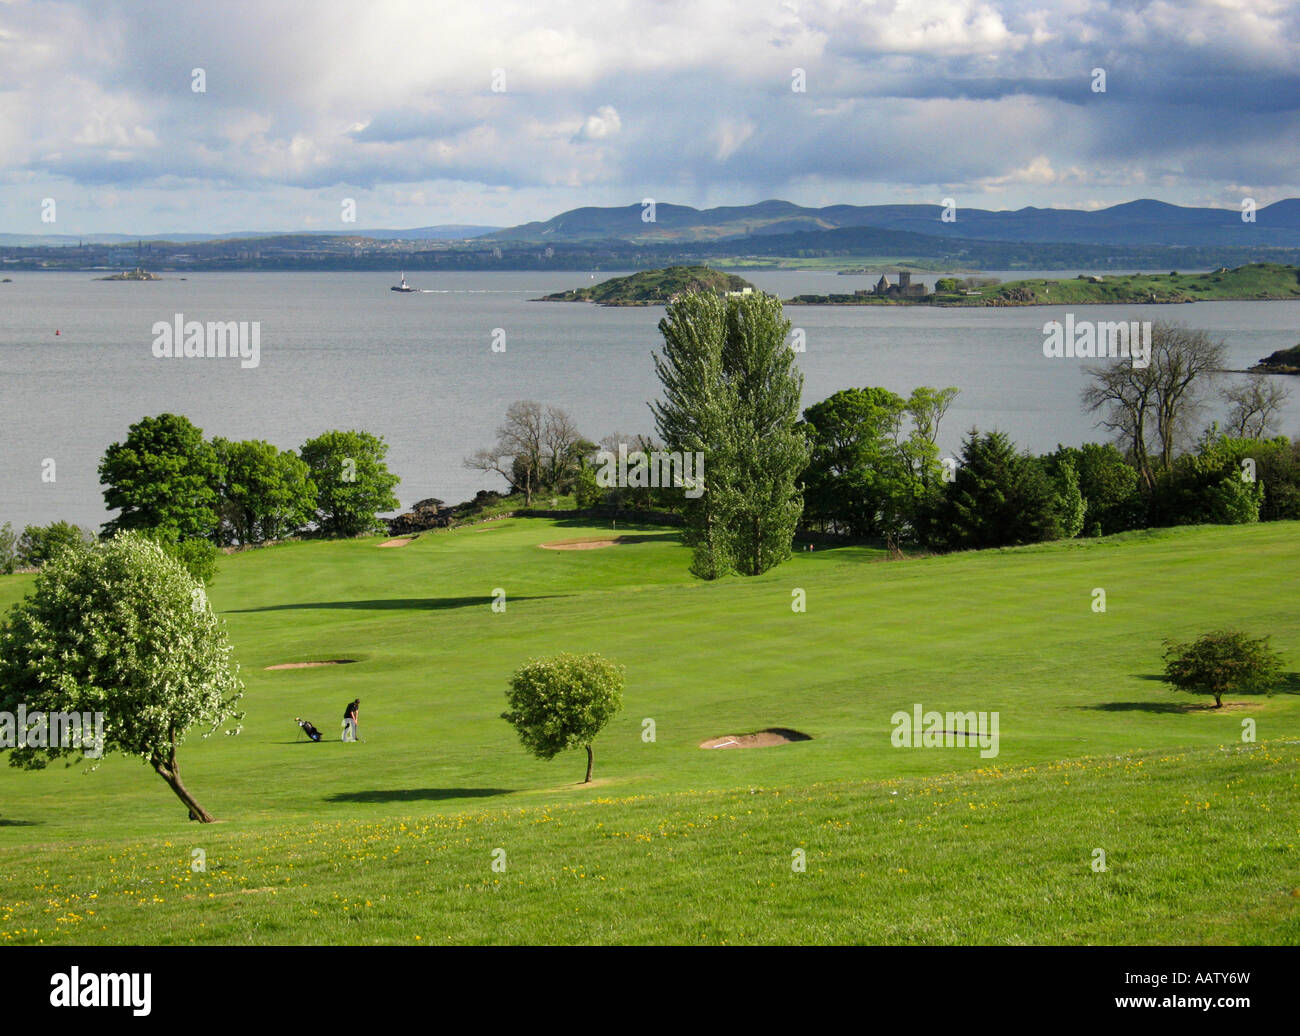 Looking across Aberdour golf course to Inchcolm Island in the Firth of Forth Stock Photo